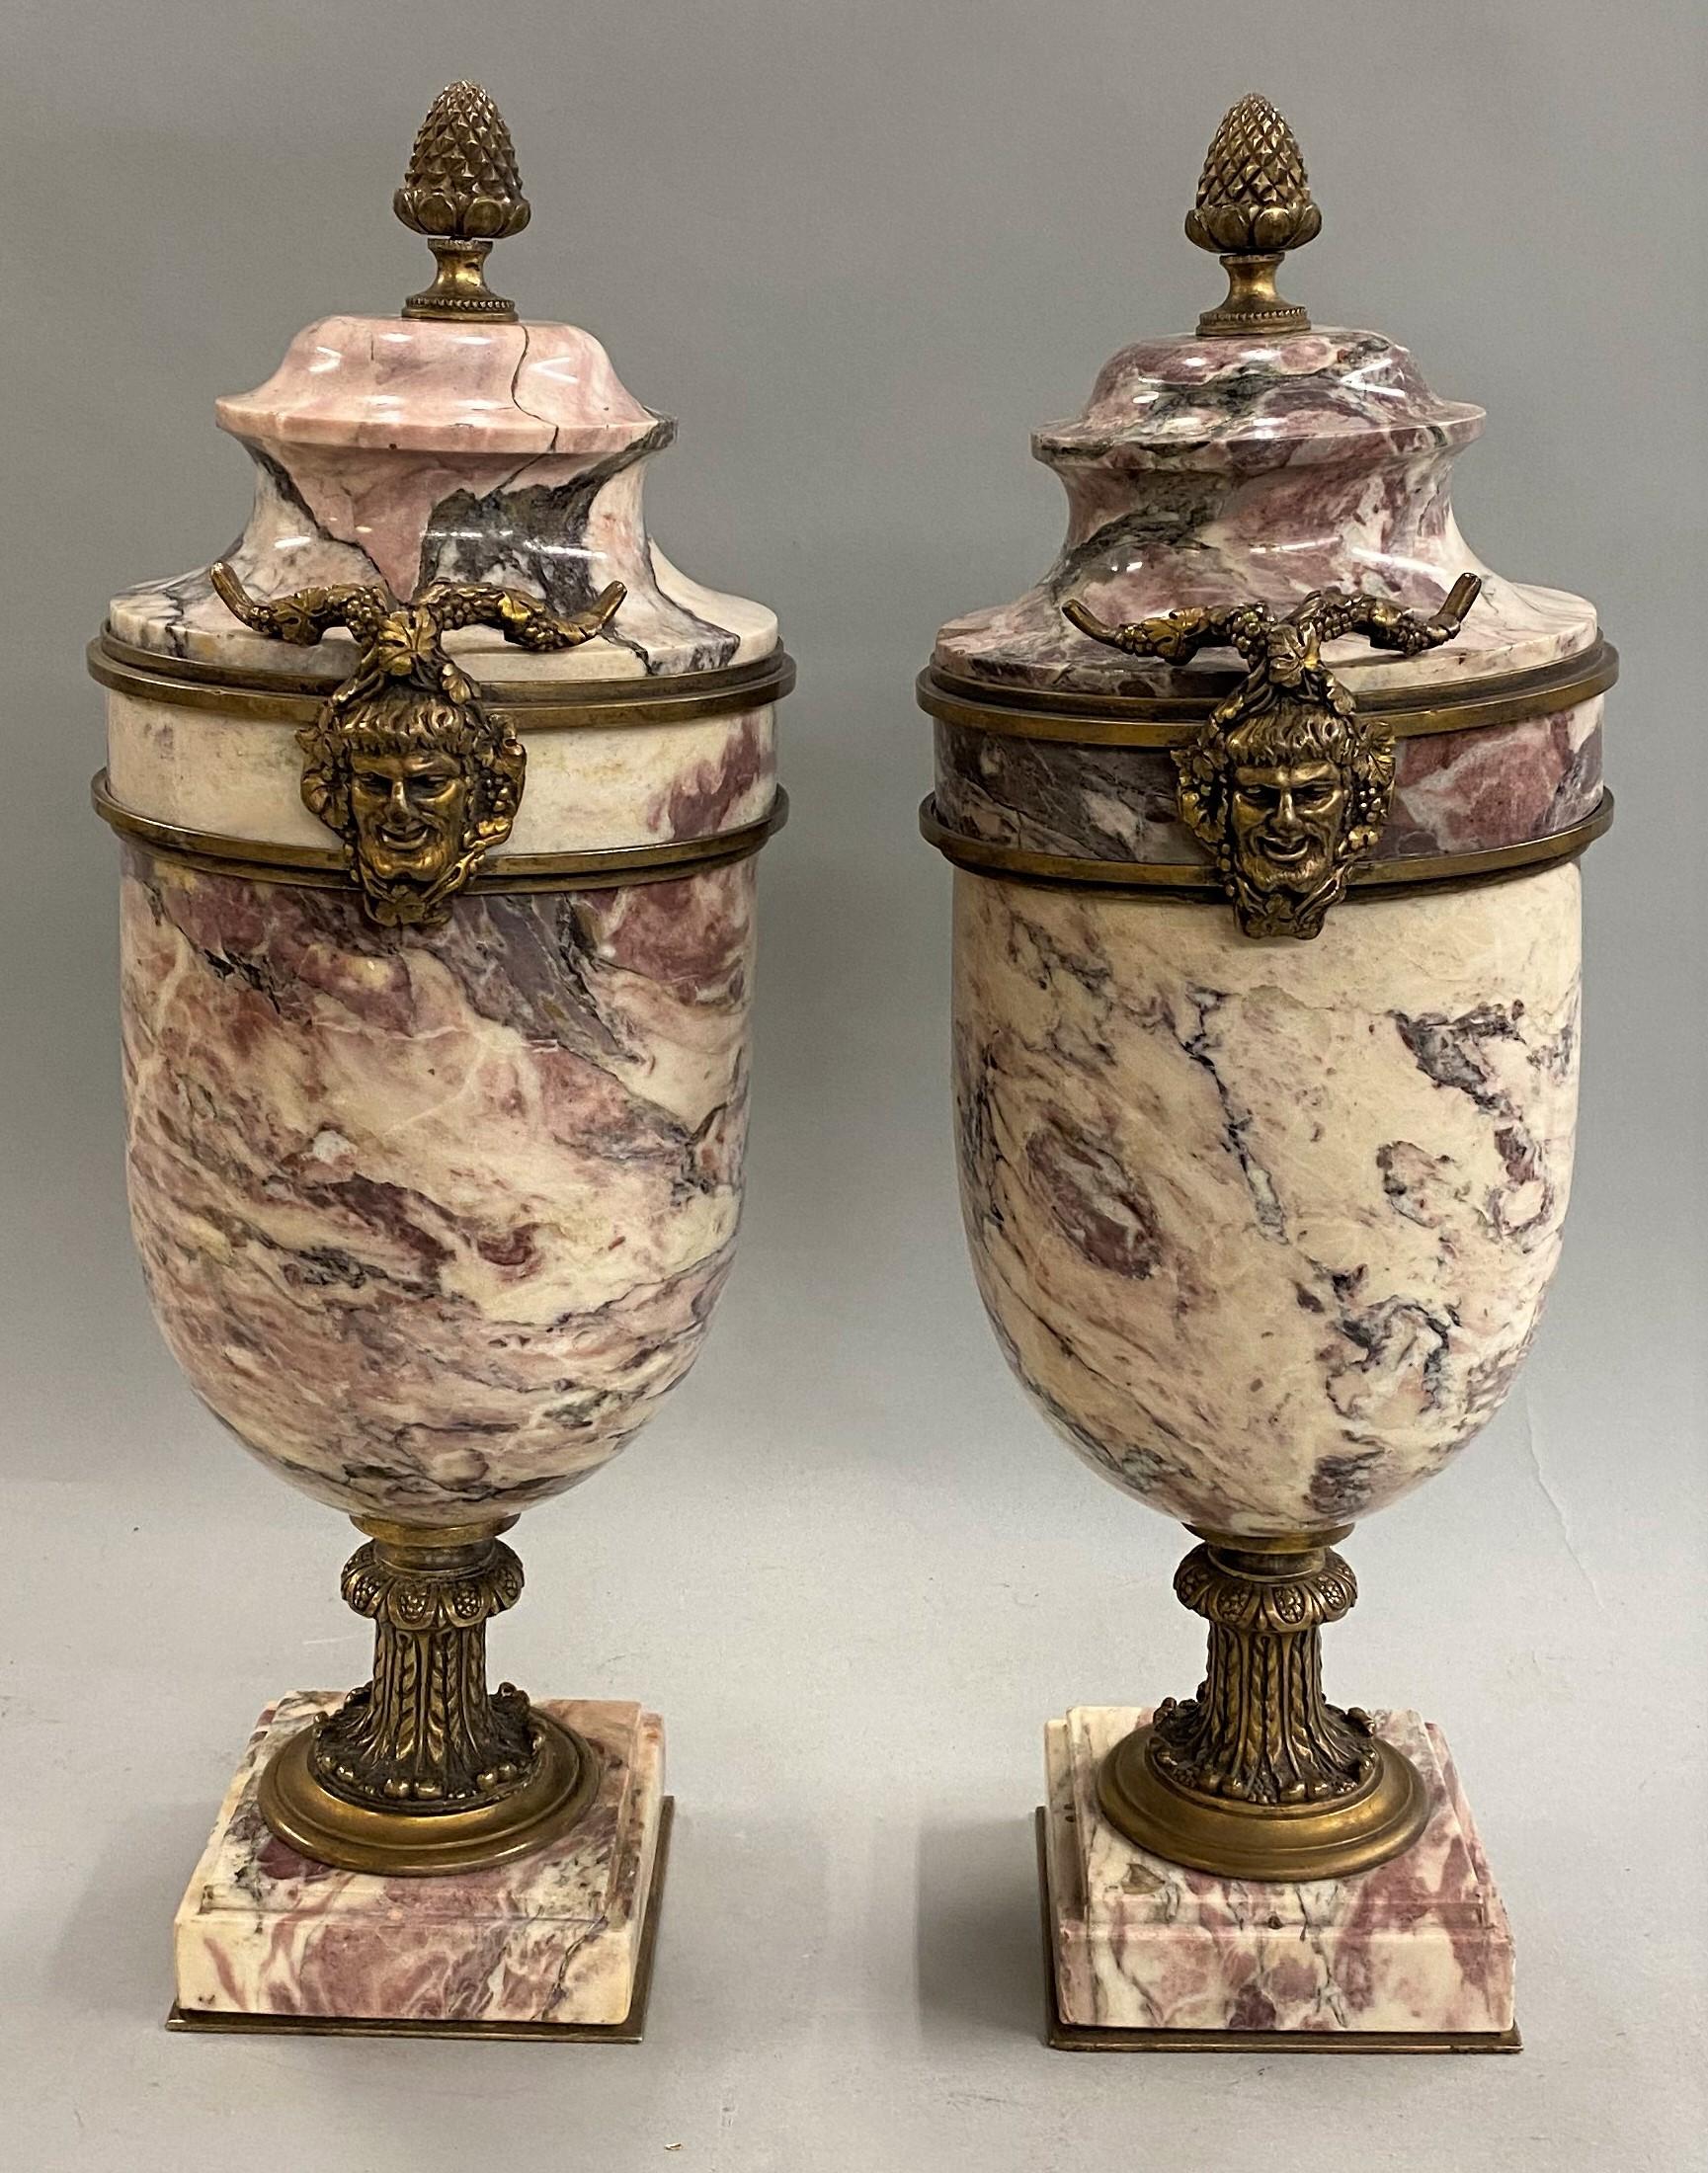 A fine pair of Italian Neoclassical style marble urns, with bronze mounts  including bronze heads of Satyr or Faun the sides of each urn, bronze bud finials, and a bronze acanthus decorated stem, supported by a square marble base on a bronze plate.